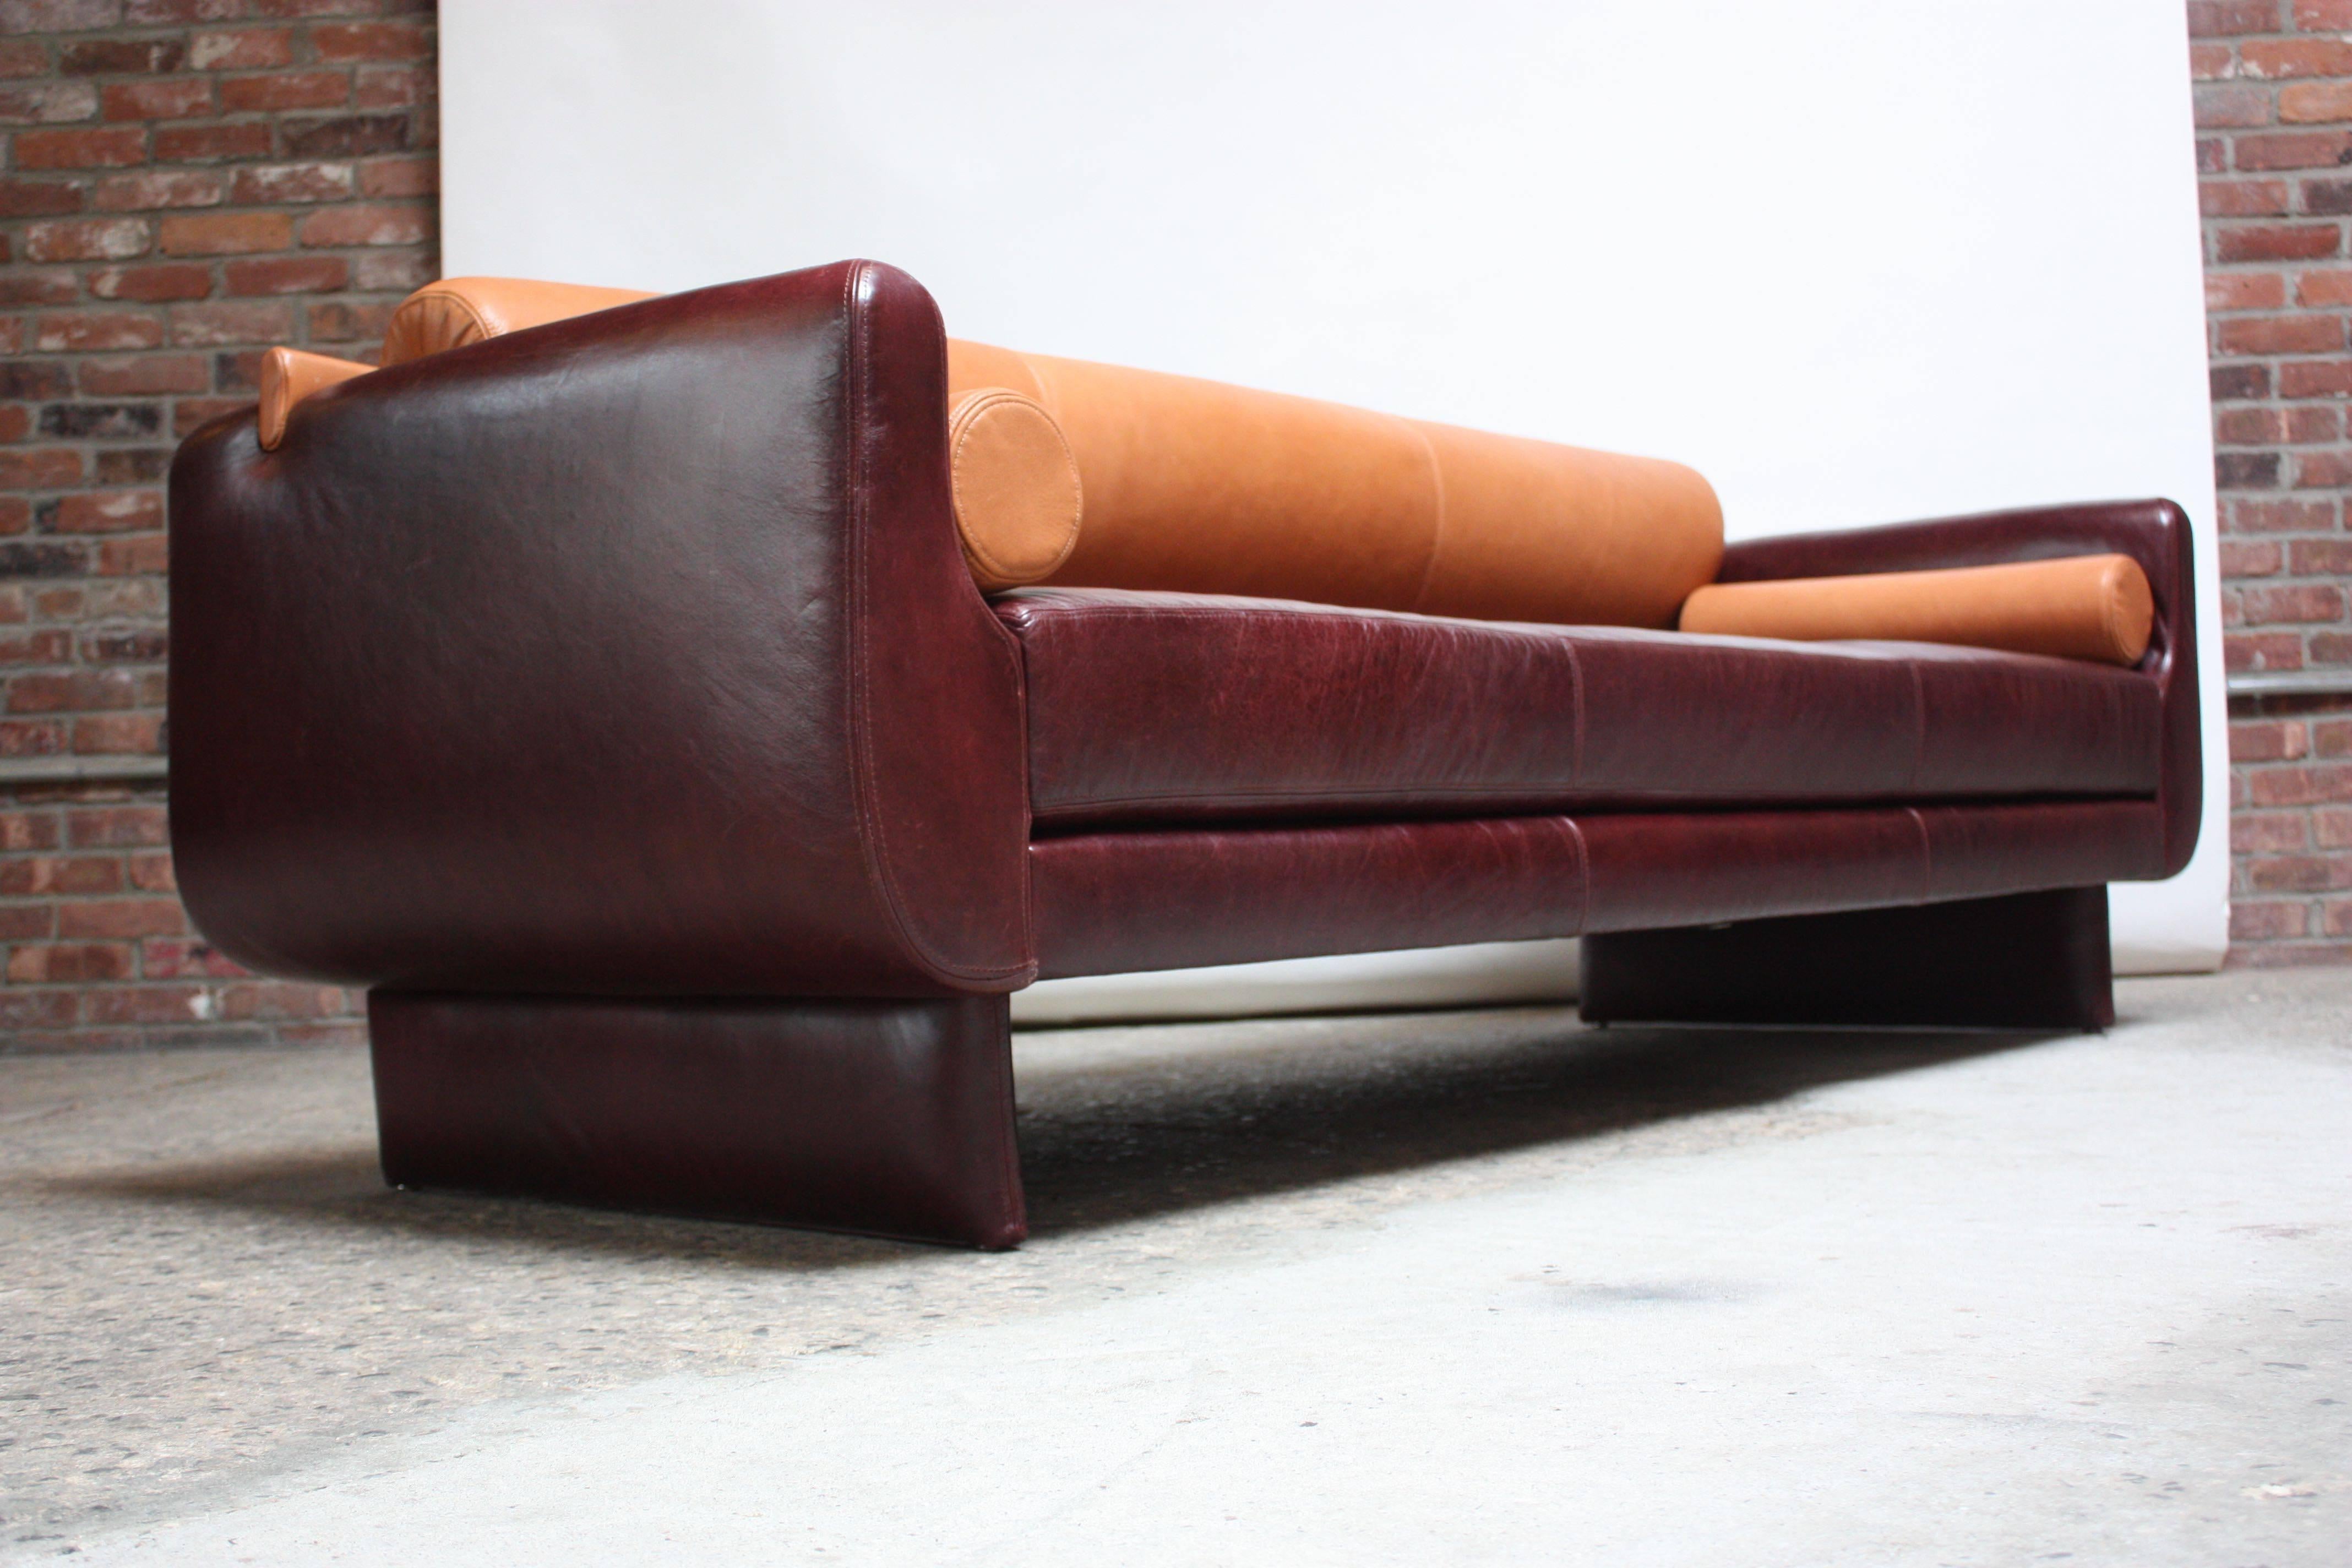 Post-Modern Vladimir Kagan 'Matinee' Sofa / Daybed in Leather